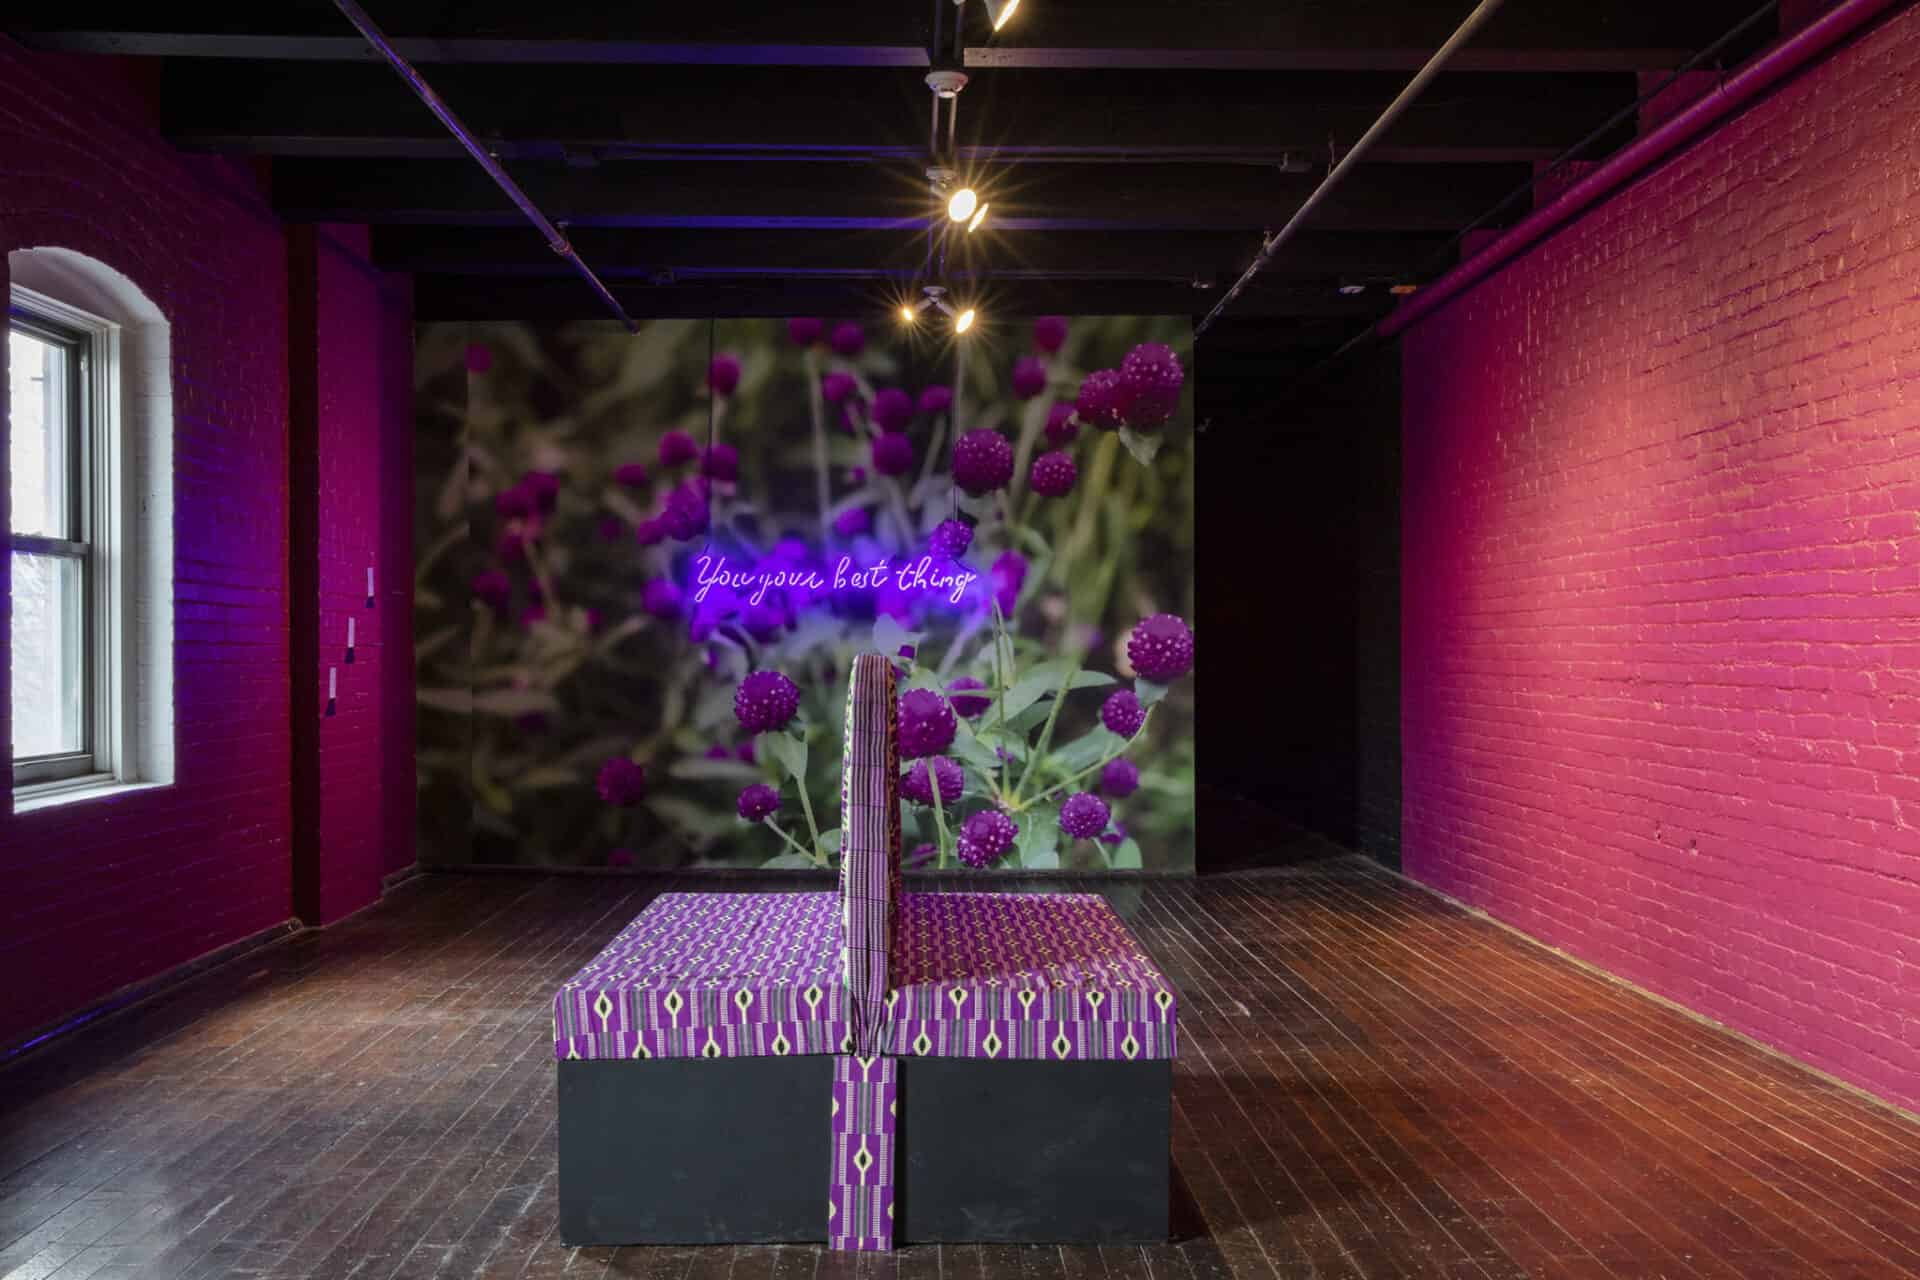 a purple bench in the middle of a museum room